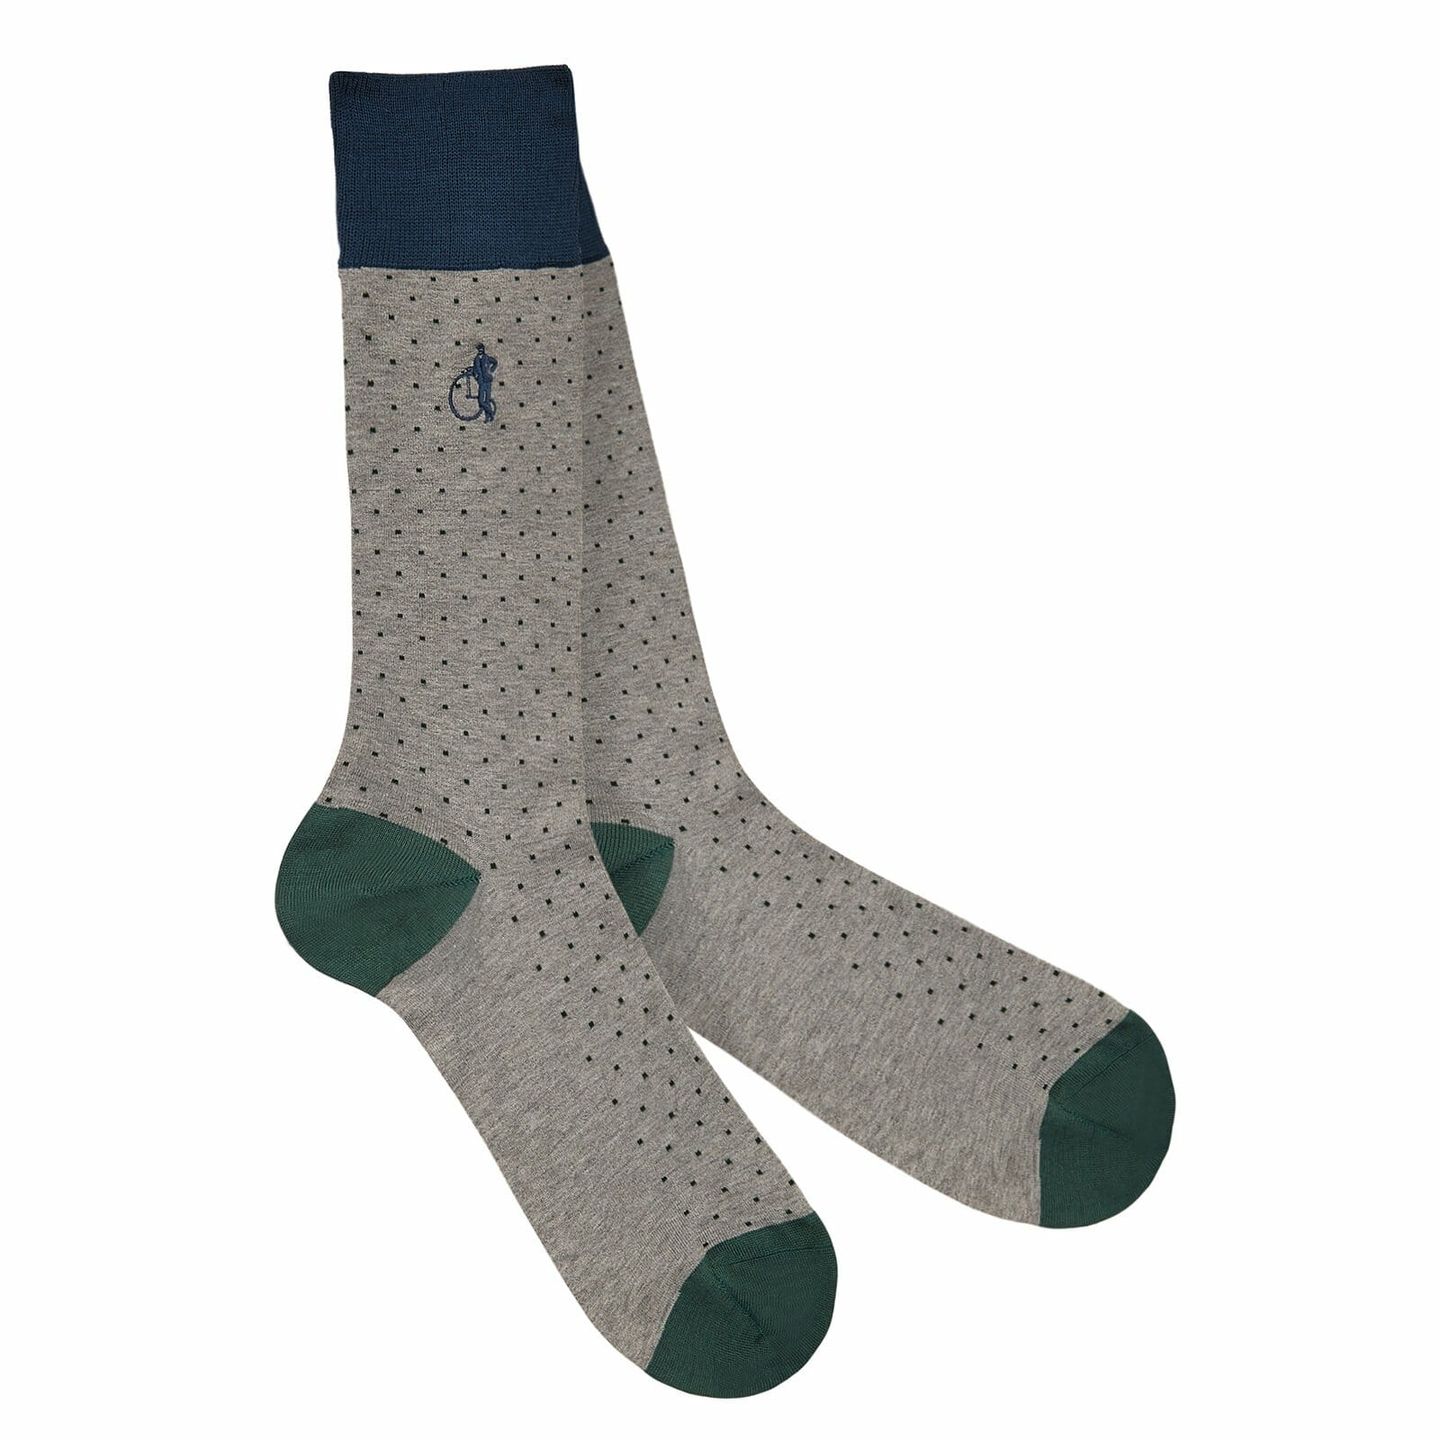 A pair of dotted socks in light brown and dark green